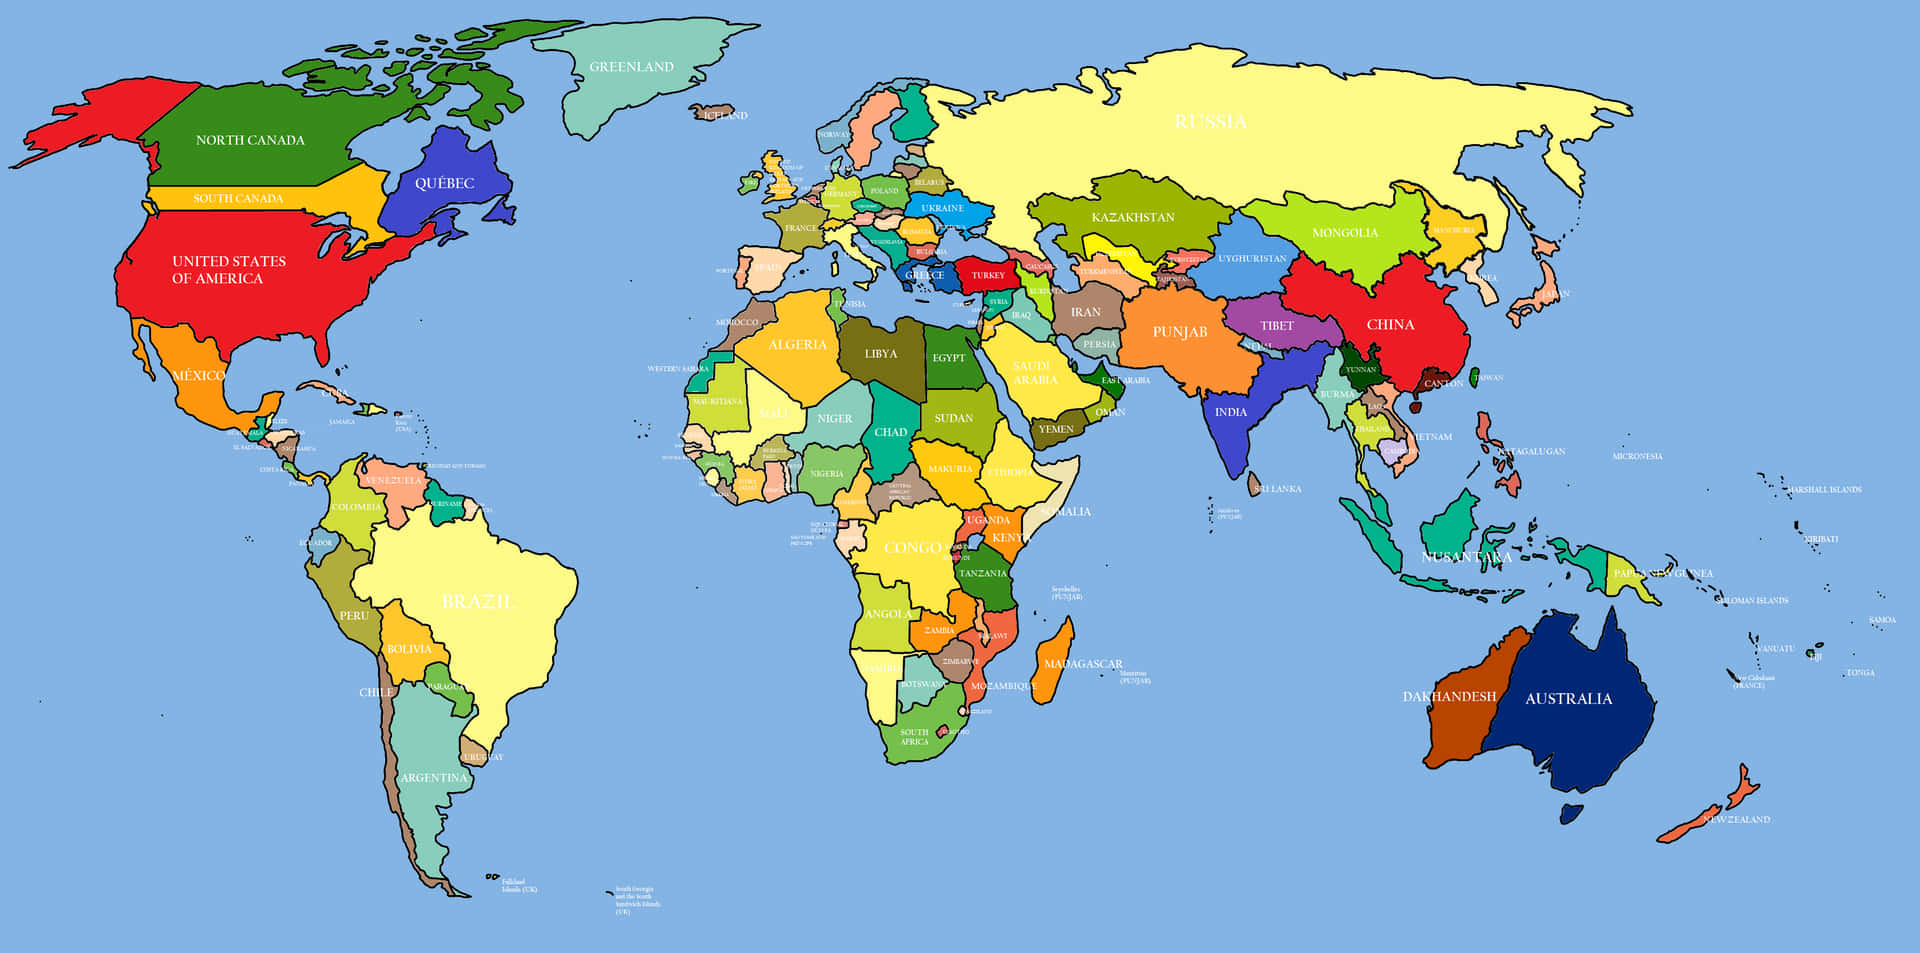 A detailed map of the world